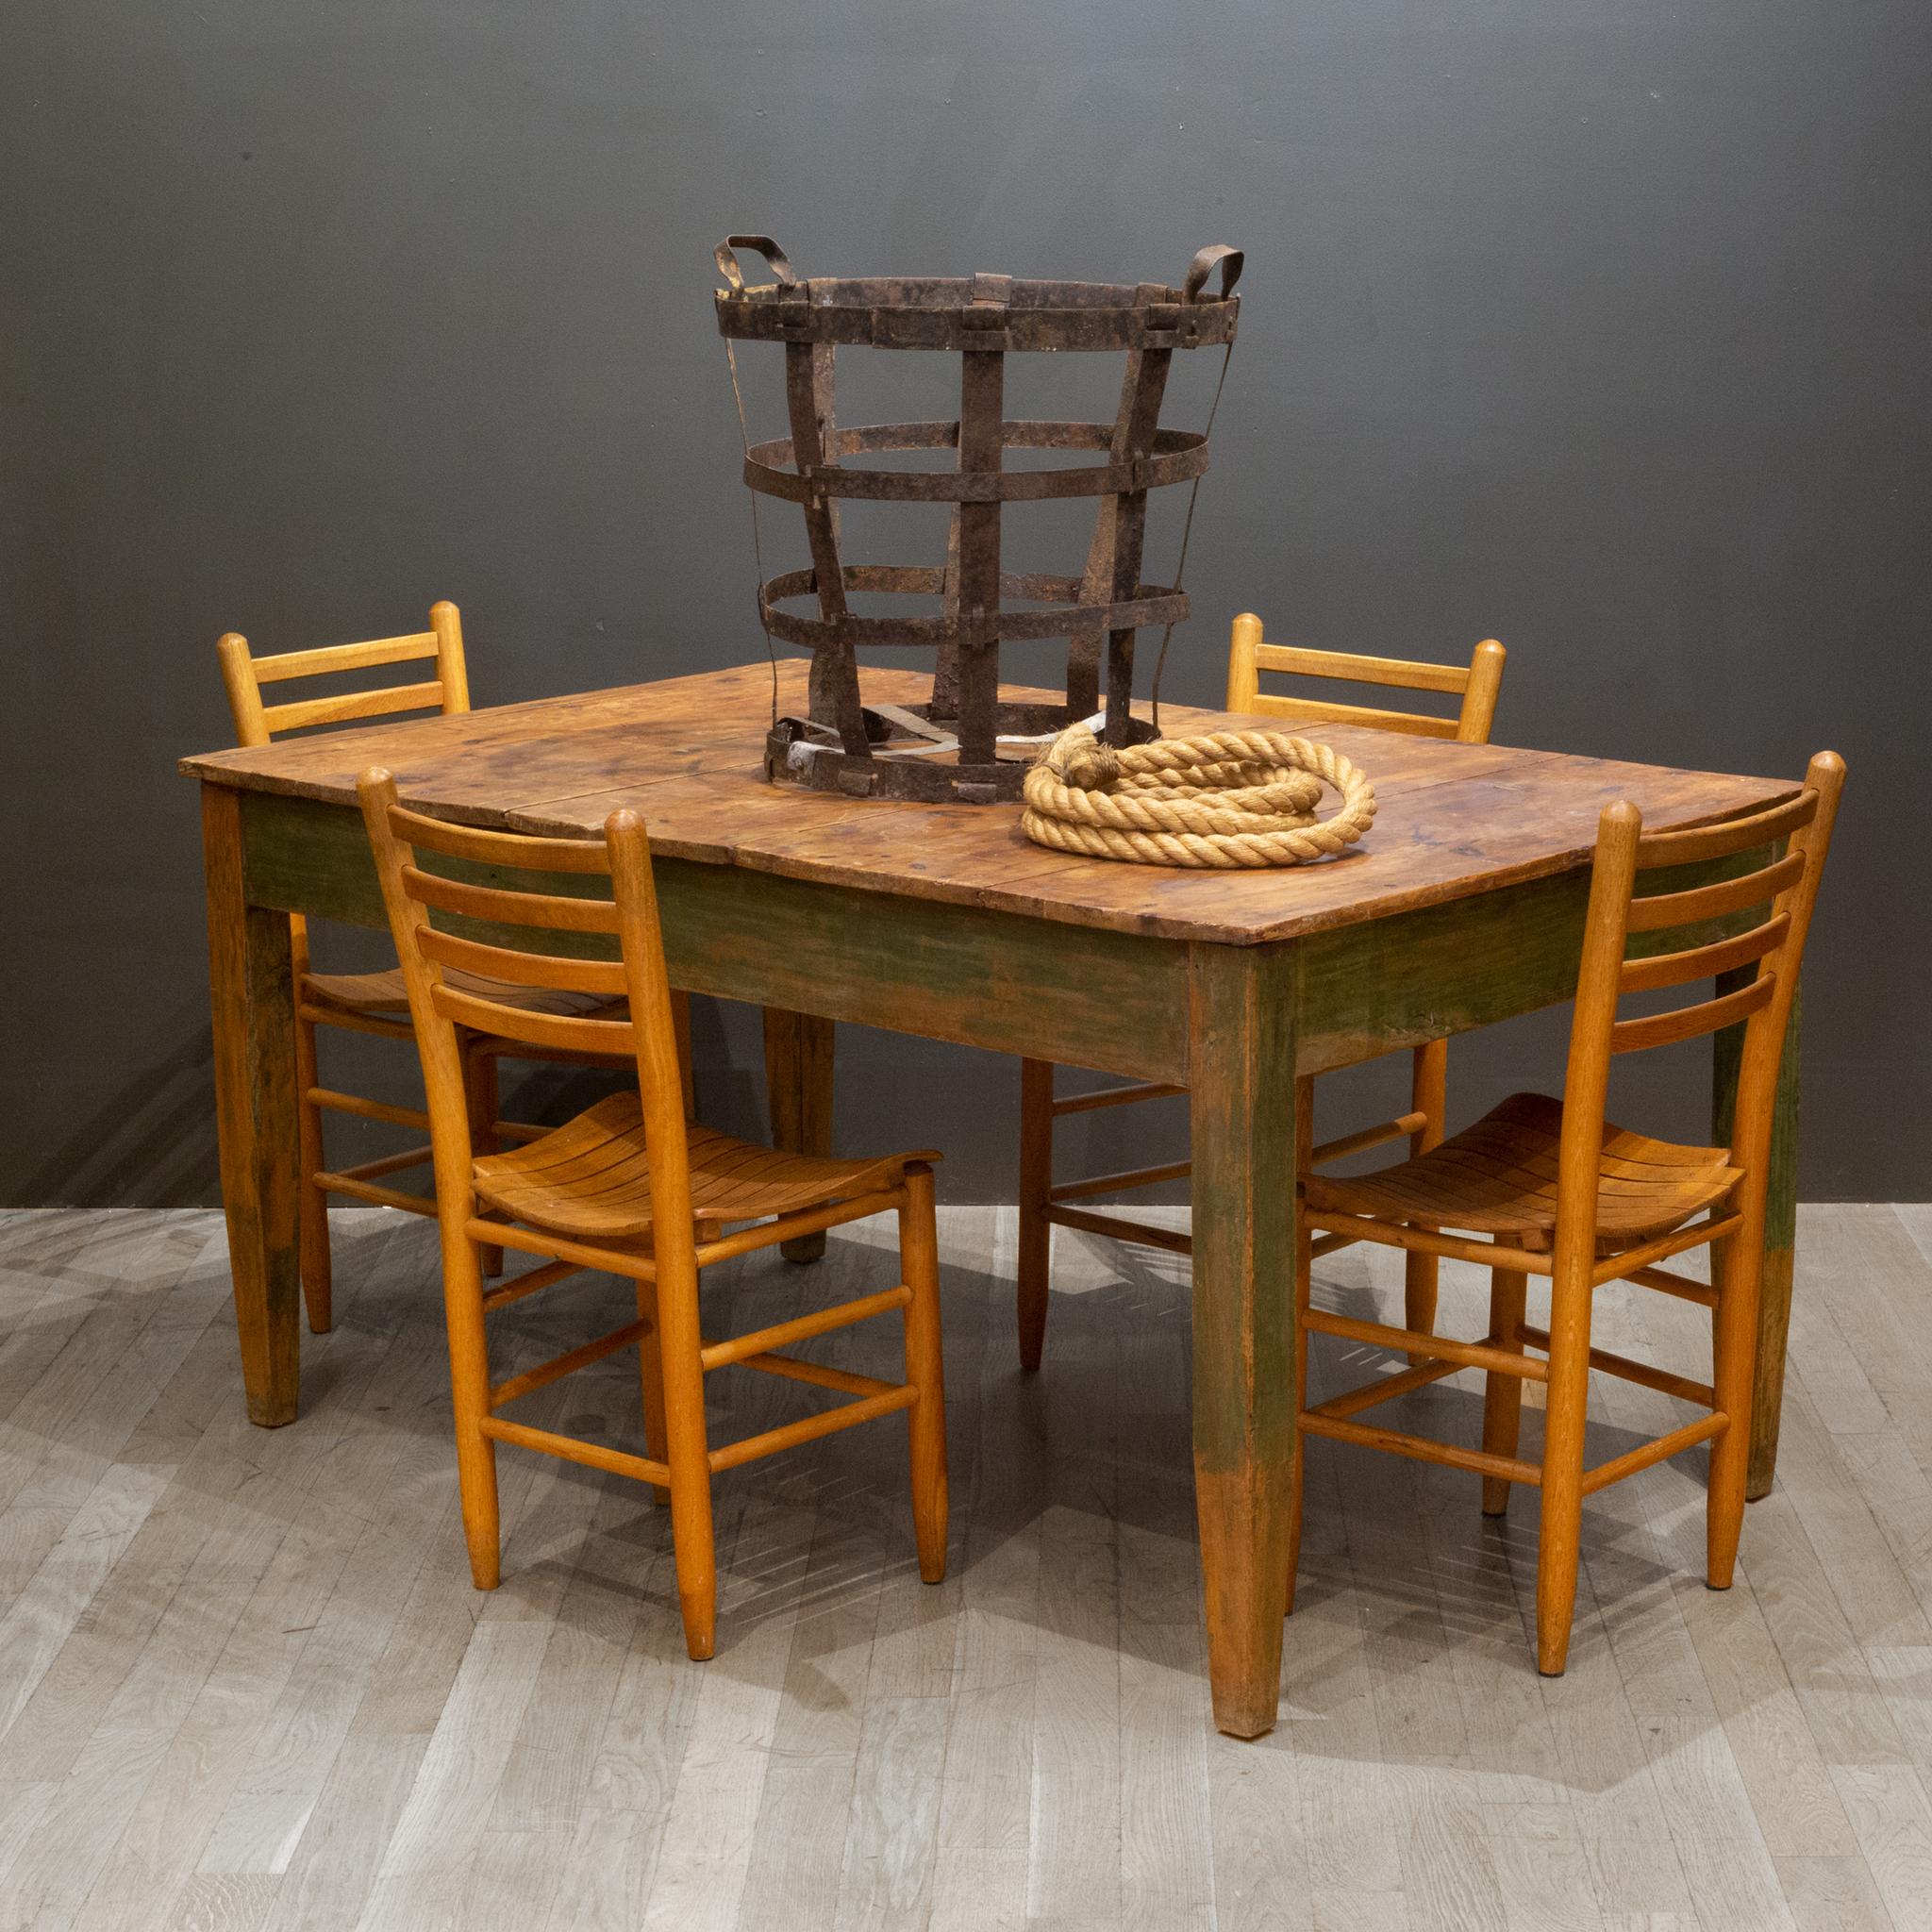 About

A handmade primitive farmhouse dining table with tapered legs. The top consists of wide planks of wood held together by tongue and groove. Antique nail heads are clearly visible throughout. The table is very sturdy. Refinished in a oil and